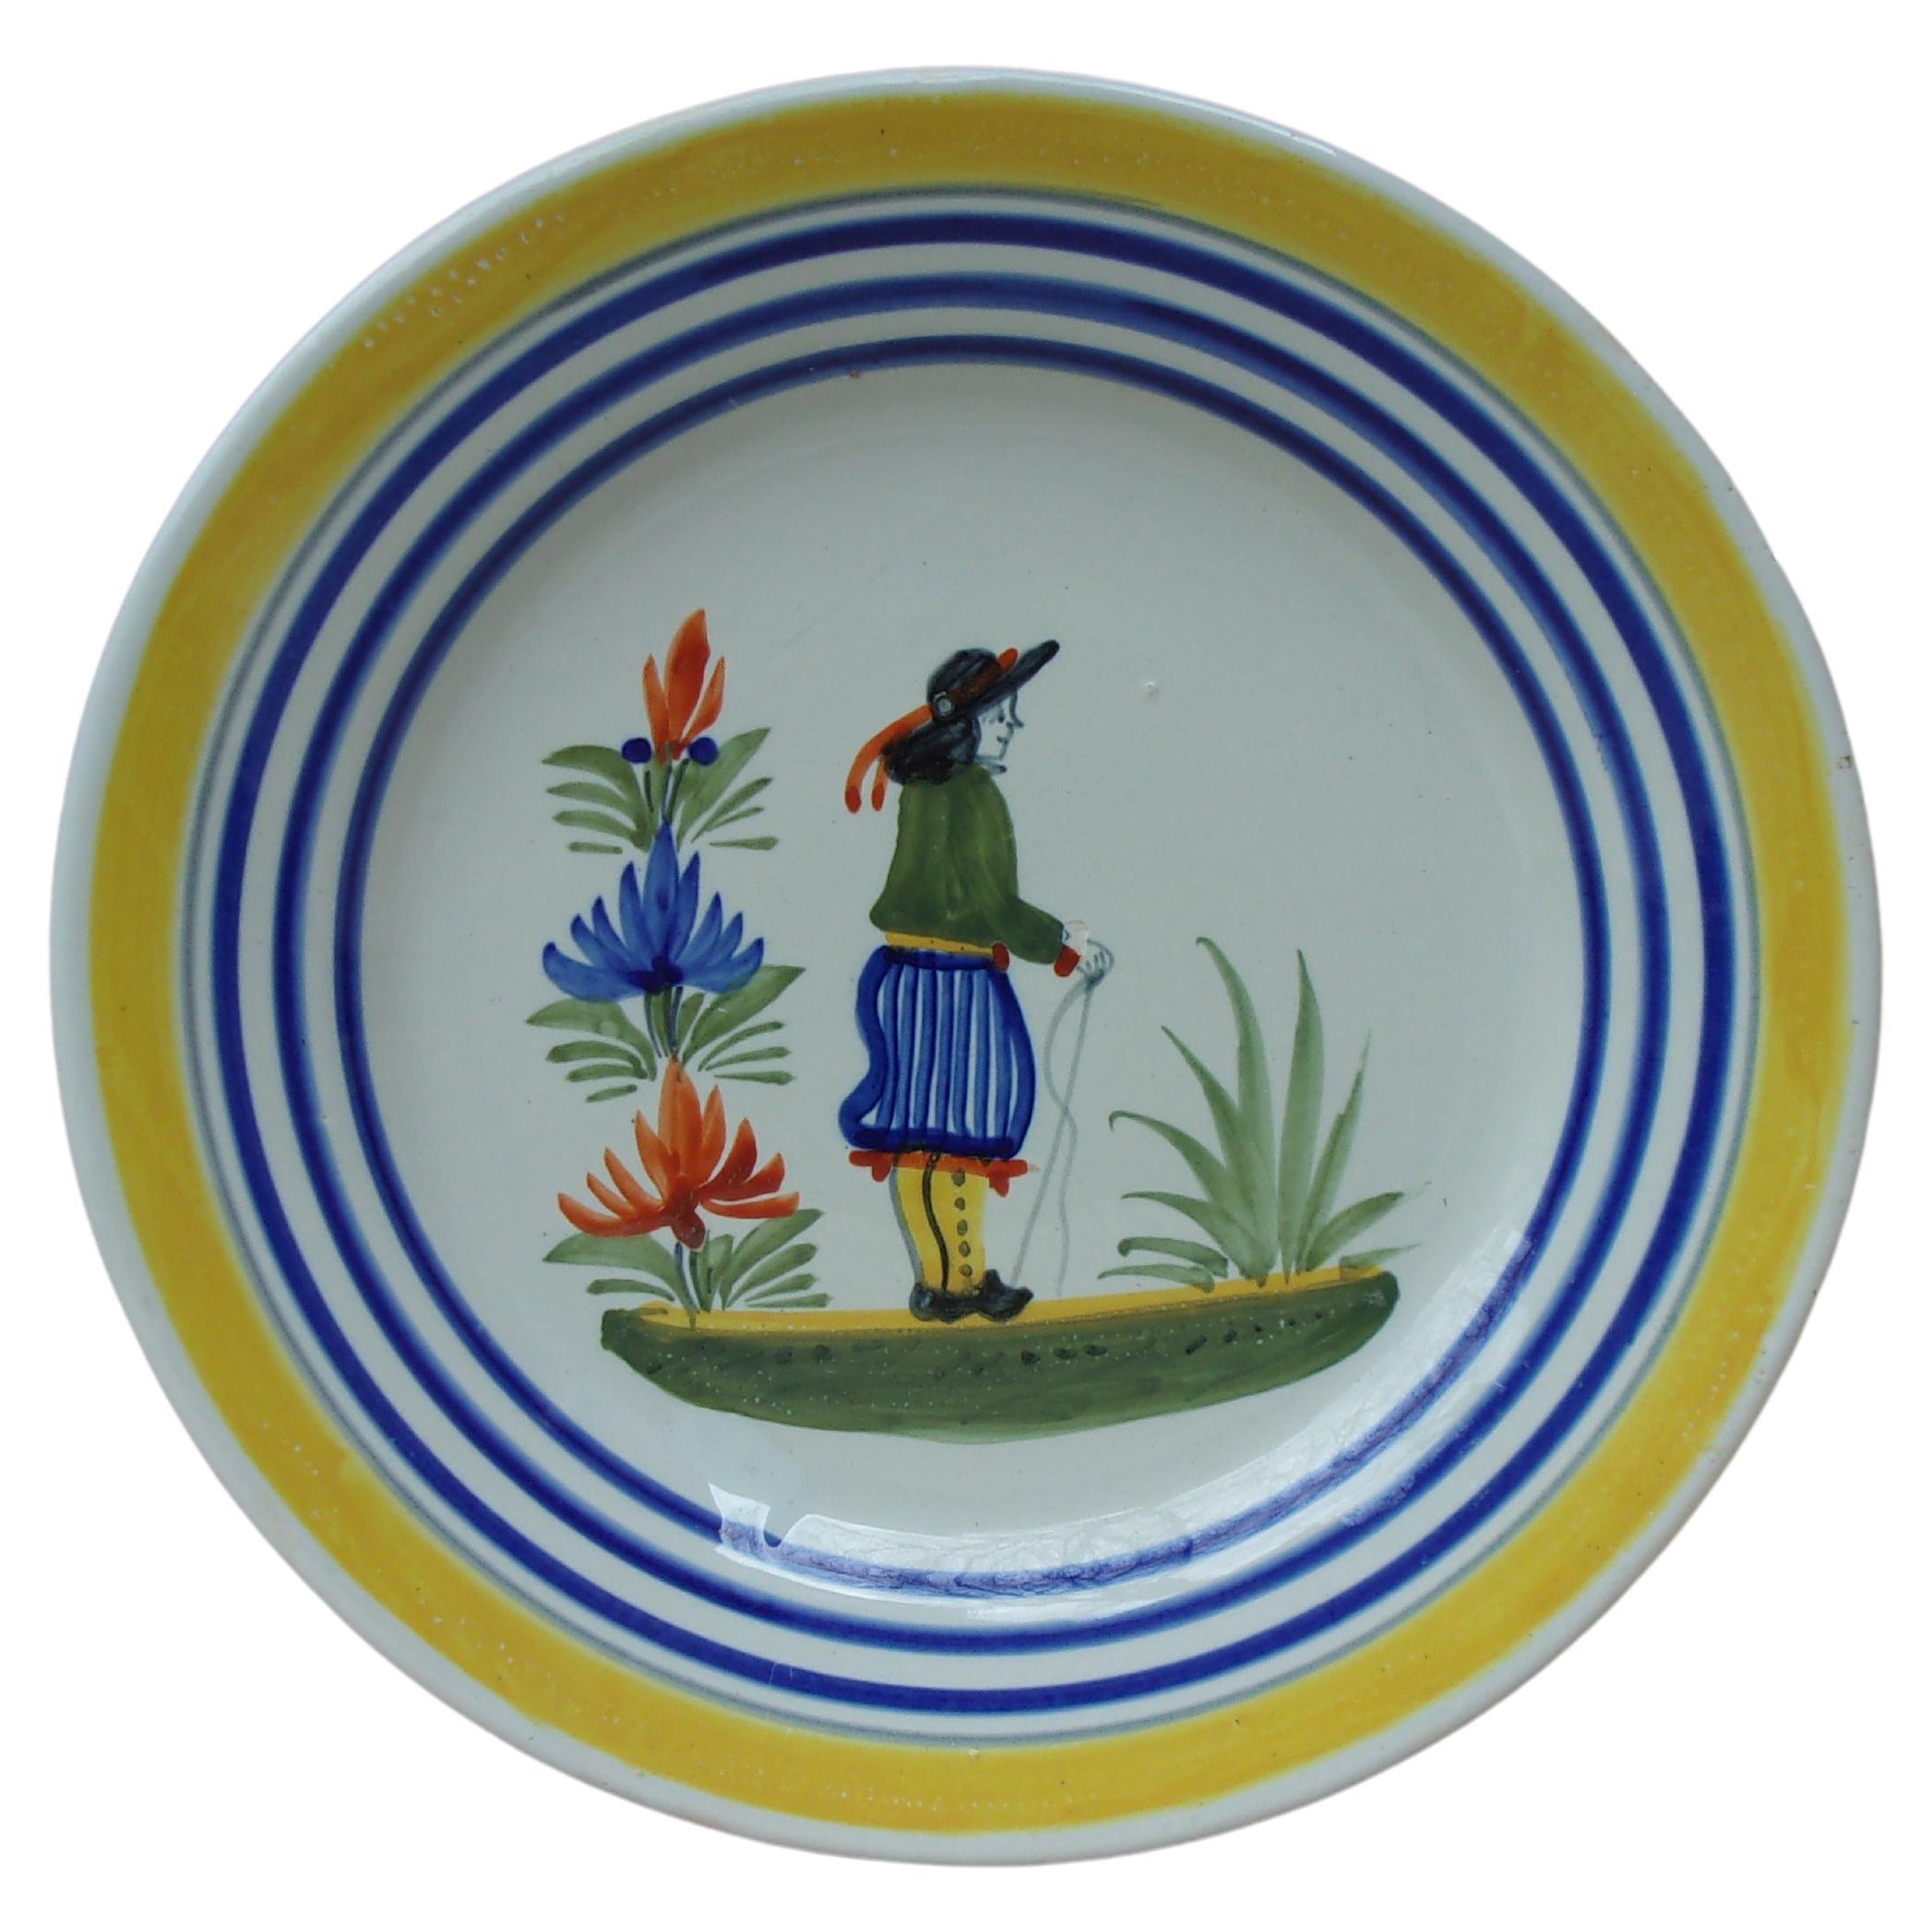 French Faience Plate Henriot Quimper, circa 1930